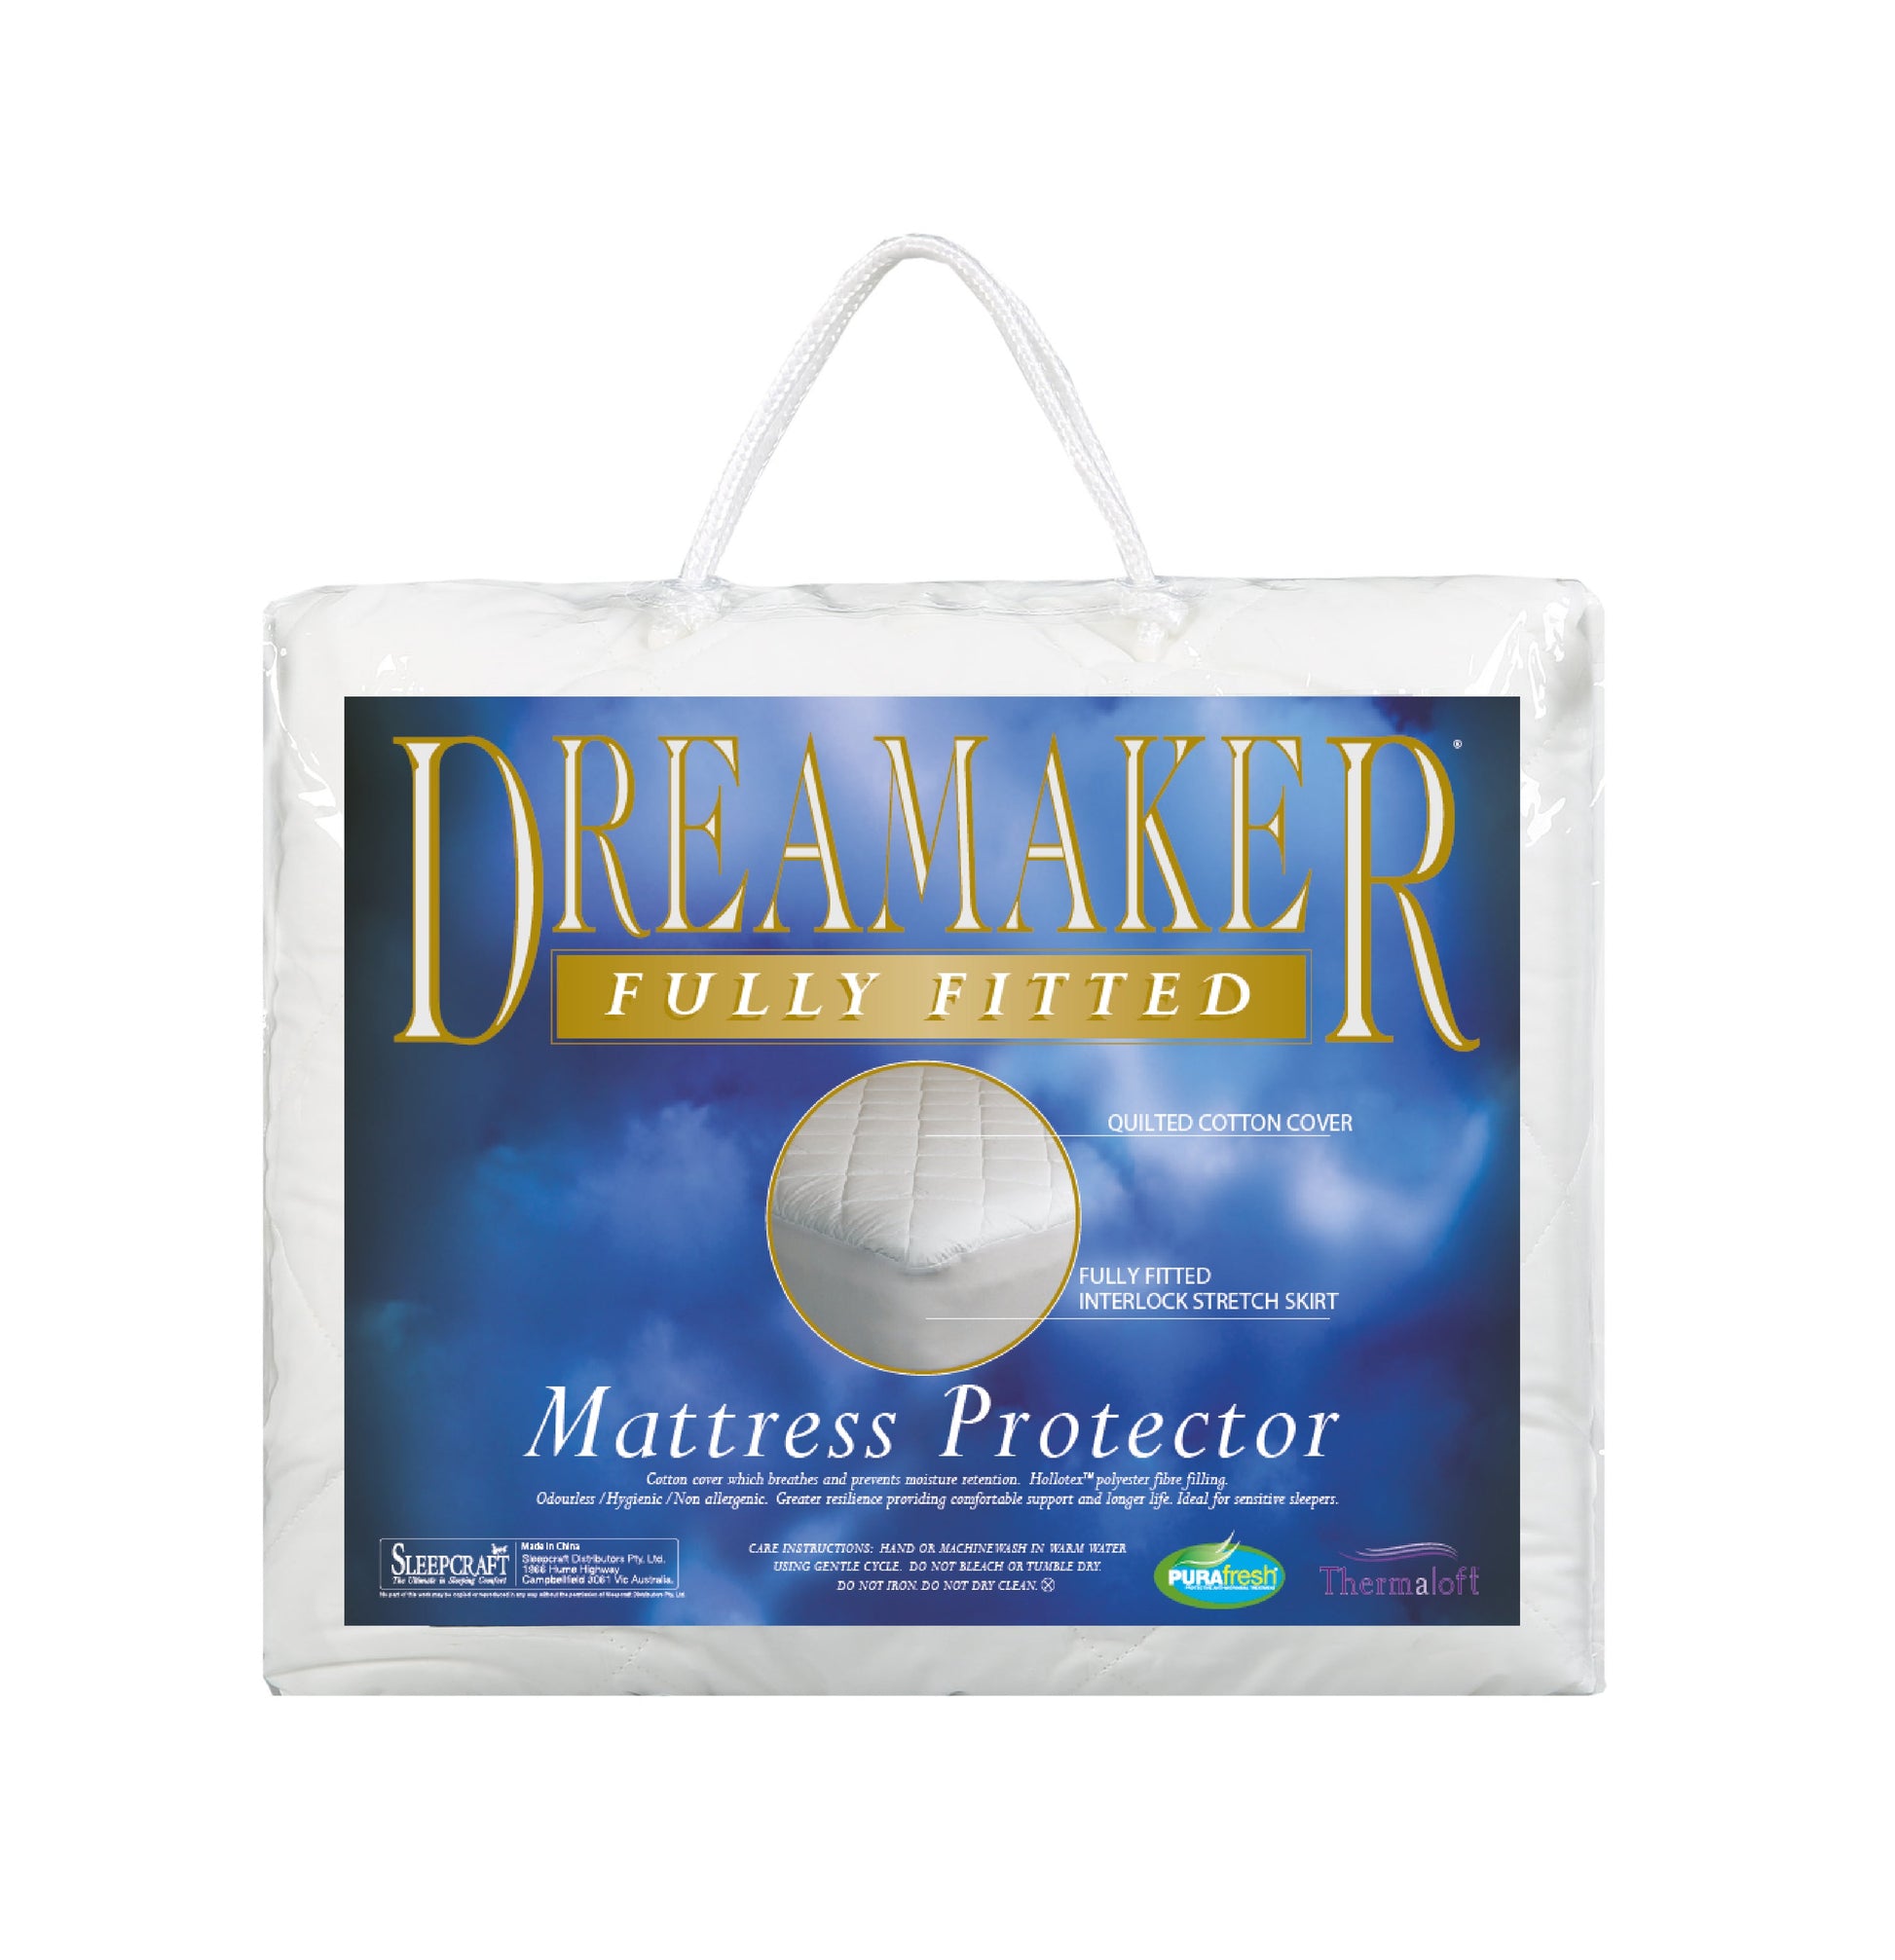 Dreamaker Thermaloft Cotton Covered Fitted Mattress Protector King Bed - image3